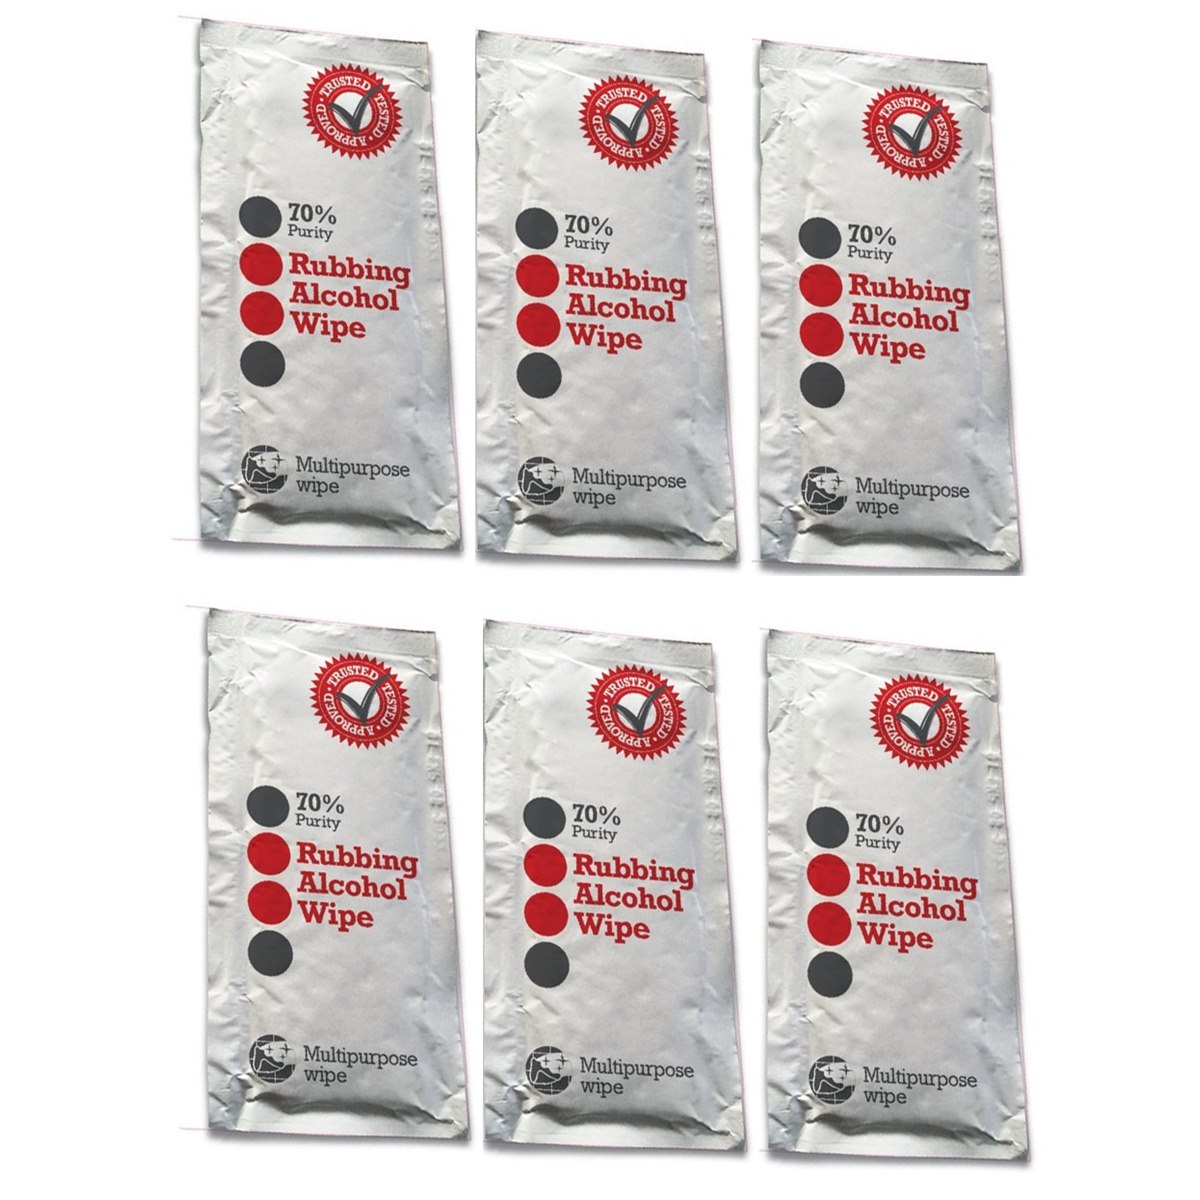 Pack of 6 x Wilsons Isopropanol 70% Purity Rubbing Alcohol Wipes